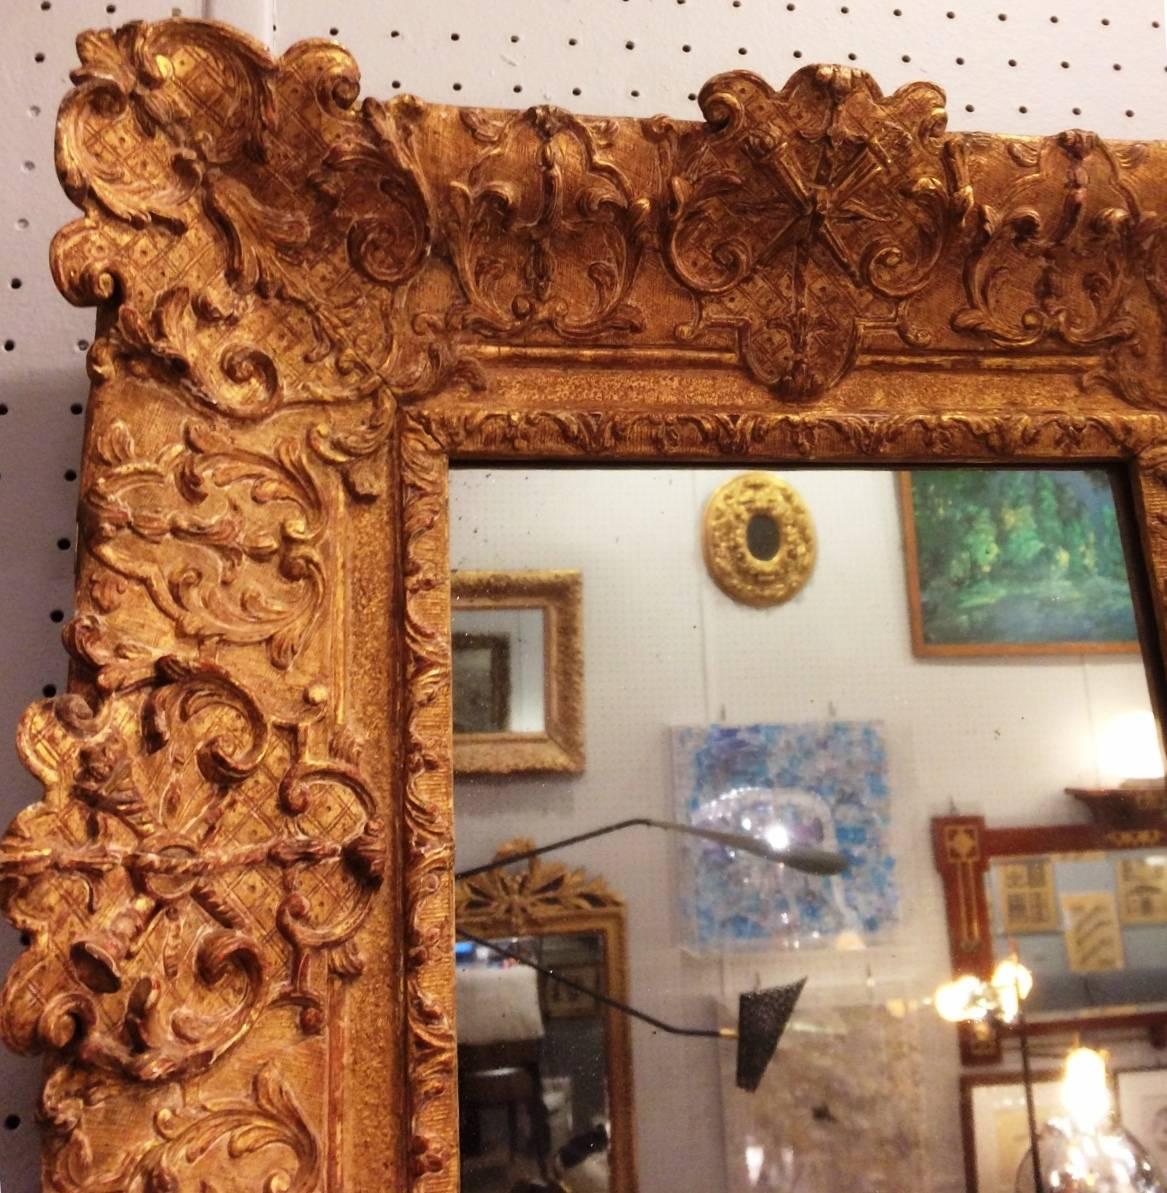 Baroque Fabulous Louis XIV Period Frame Mounted as Mirror, France, Early 18th Century